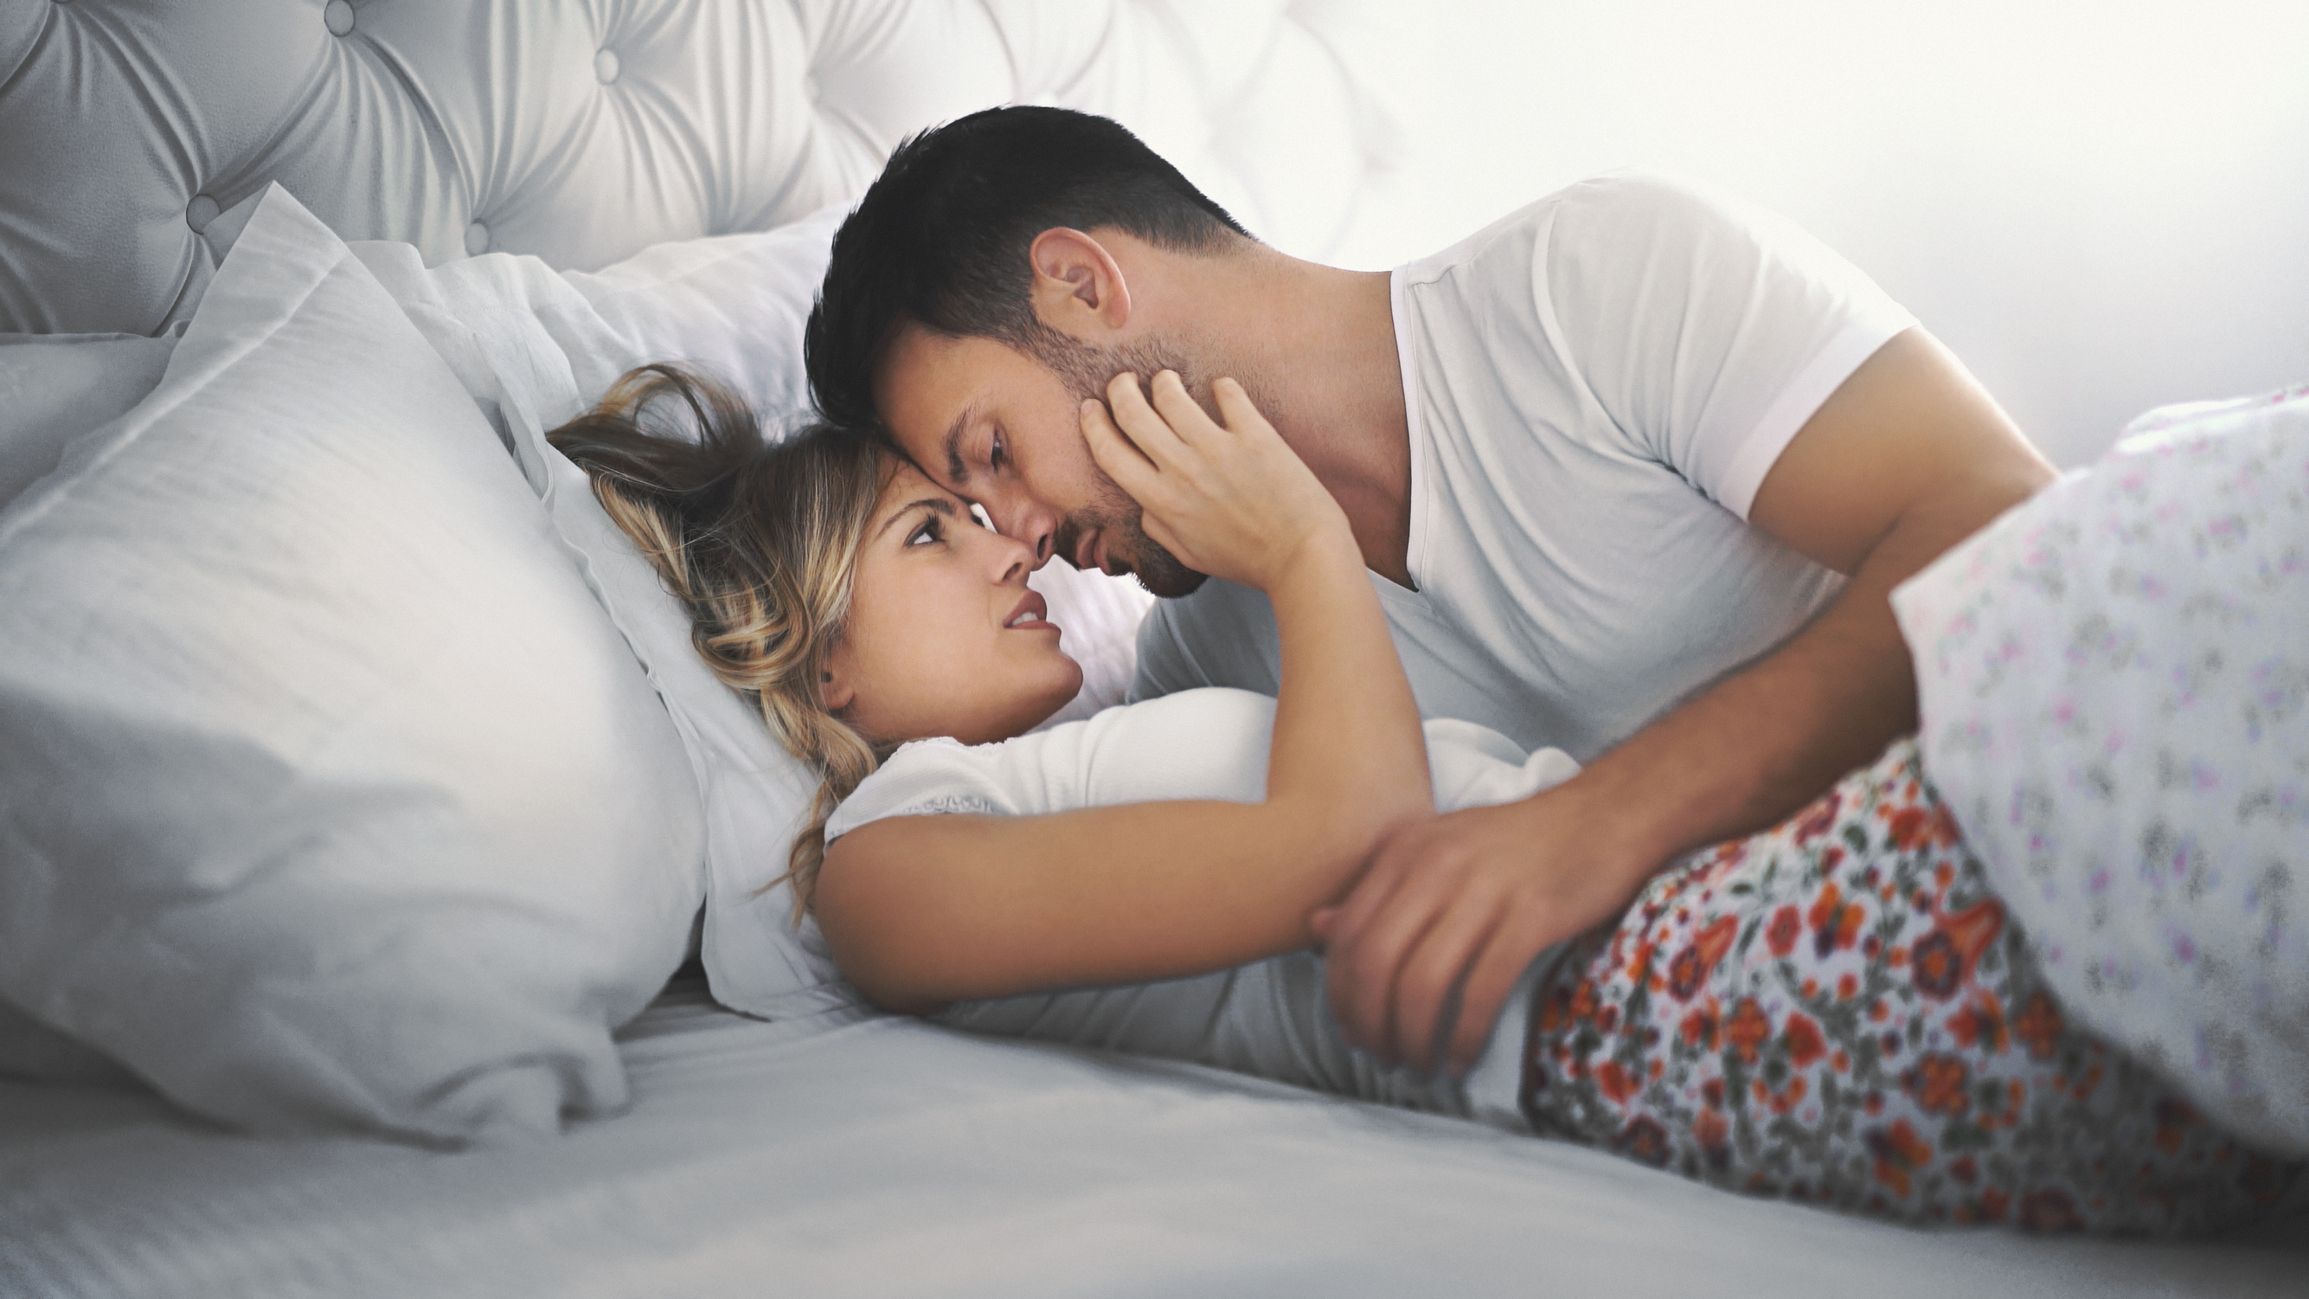 If you're looking to up your bedroom game, Kraken male enhancement might be just what you need. Read a detailed profile of the supplement and its benefits.